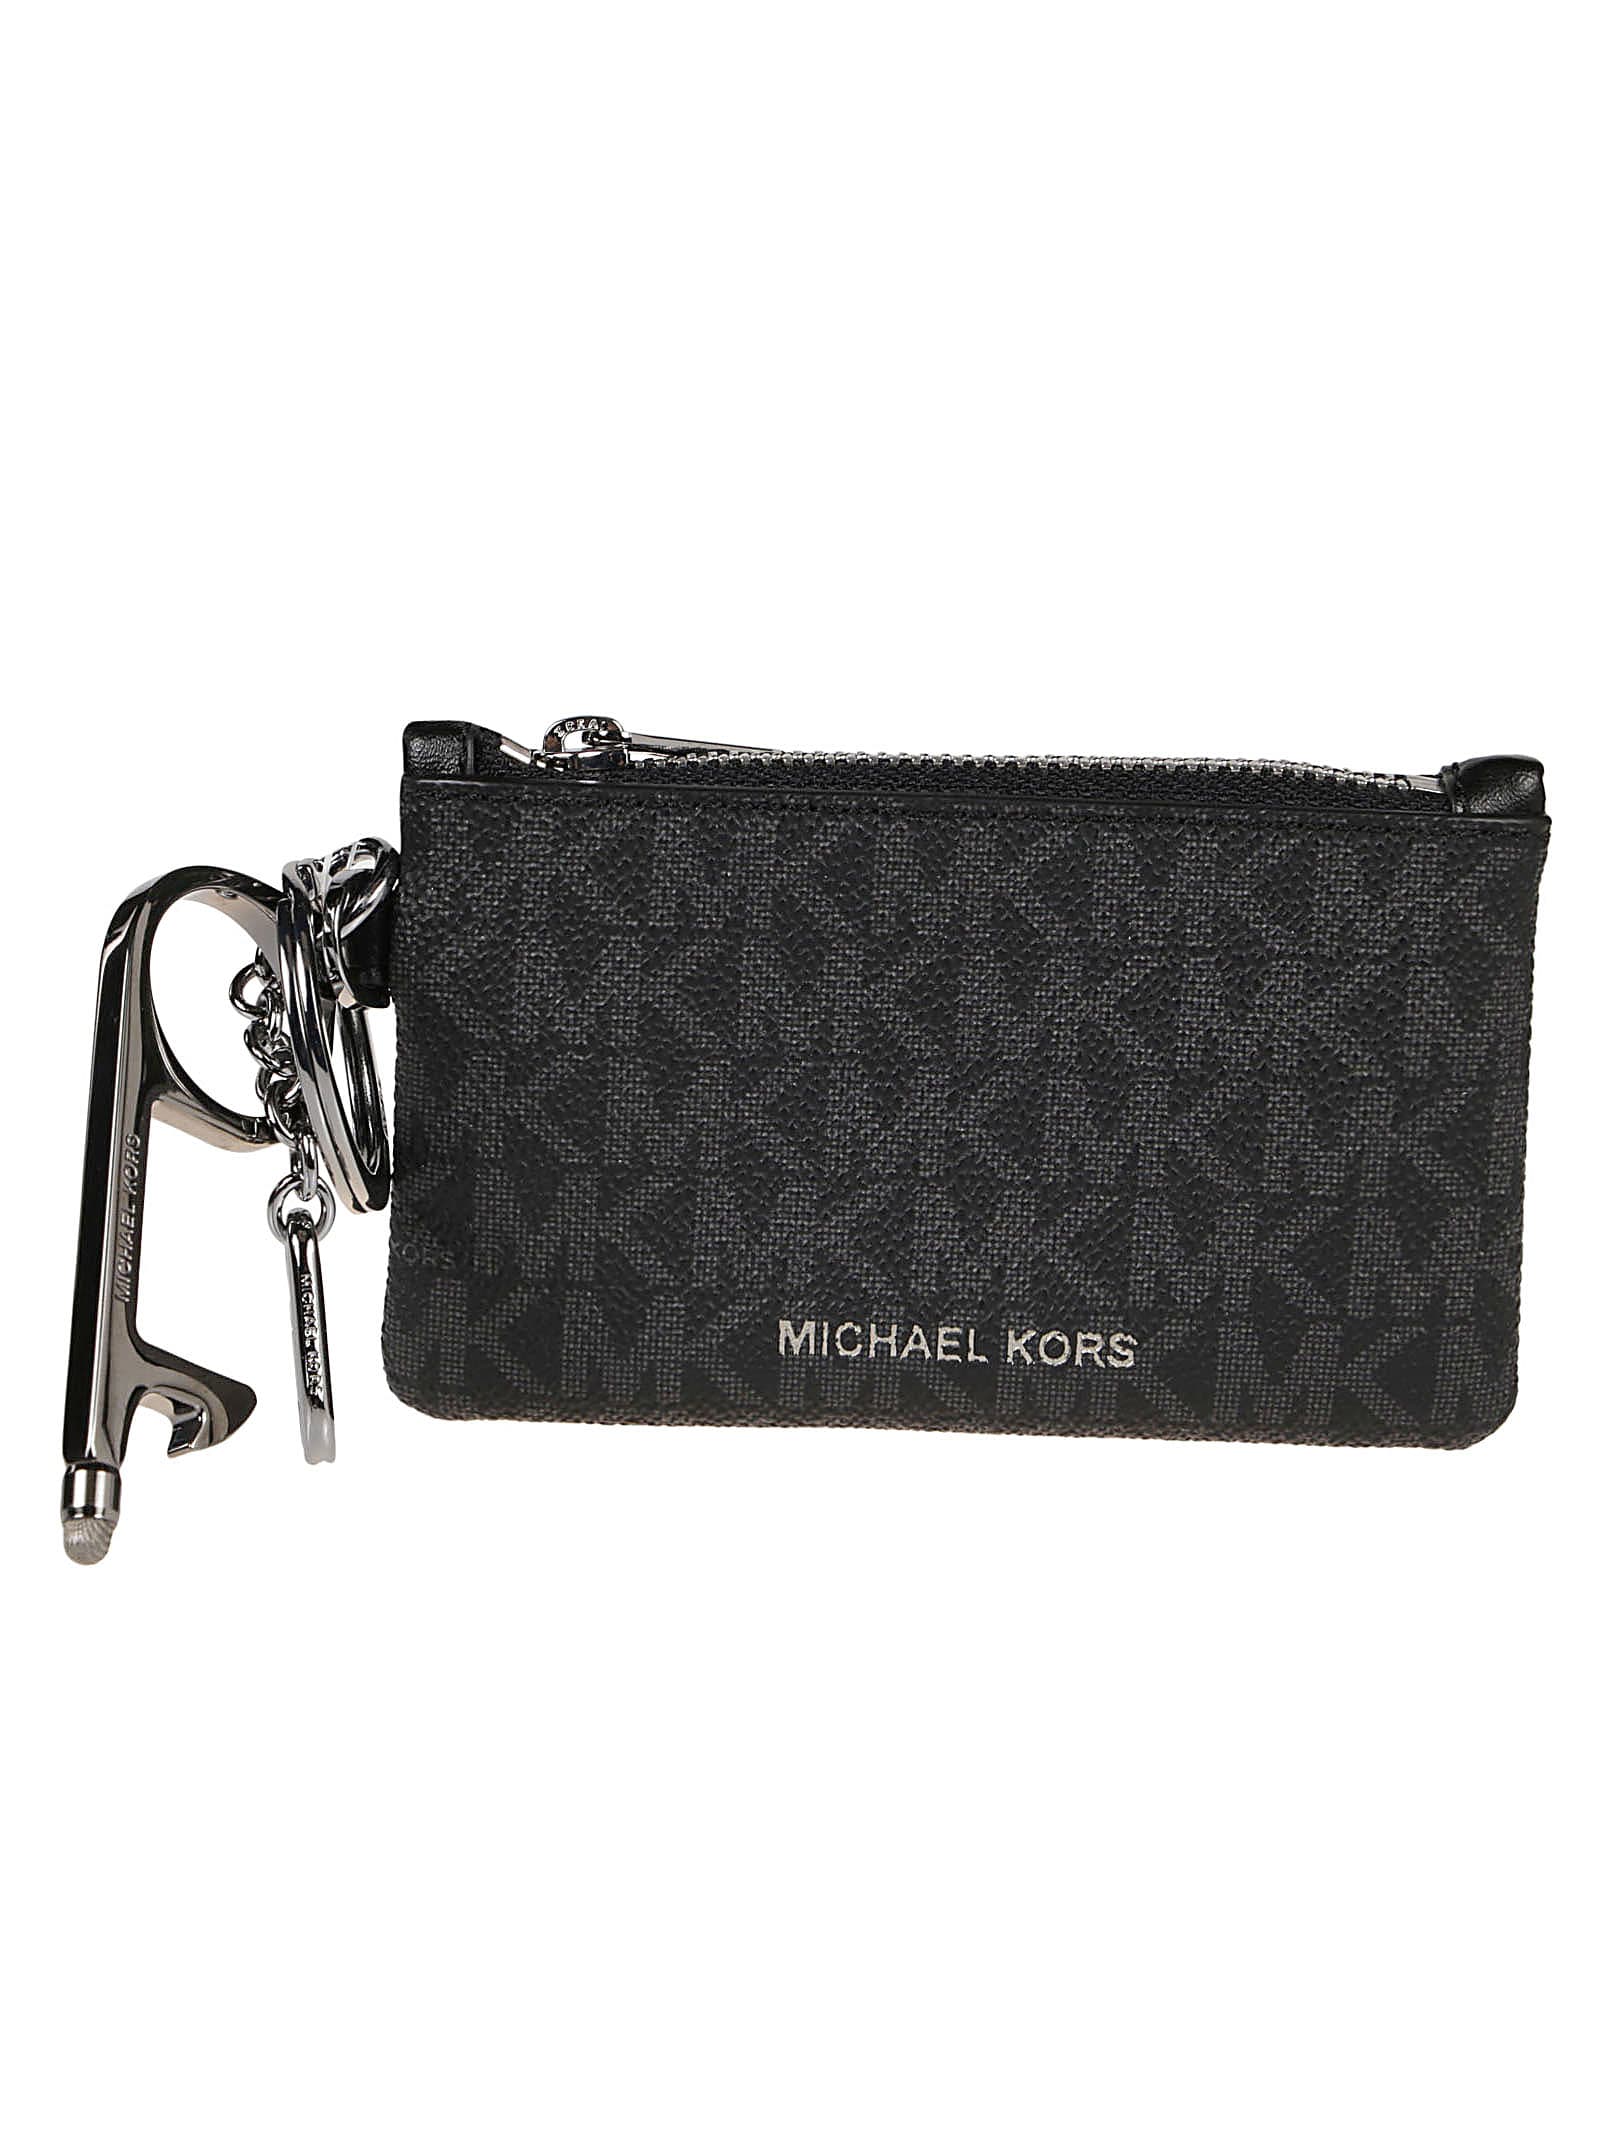 Michael Kors Gifting Notouch W/pouch Box Set